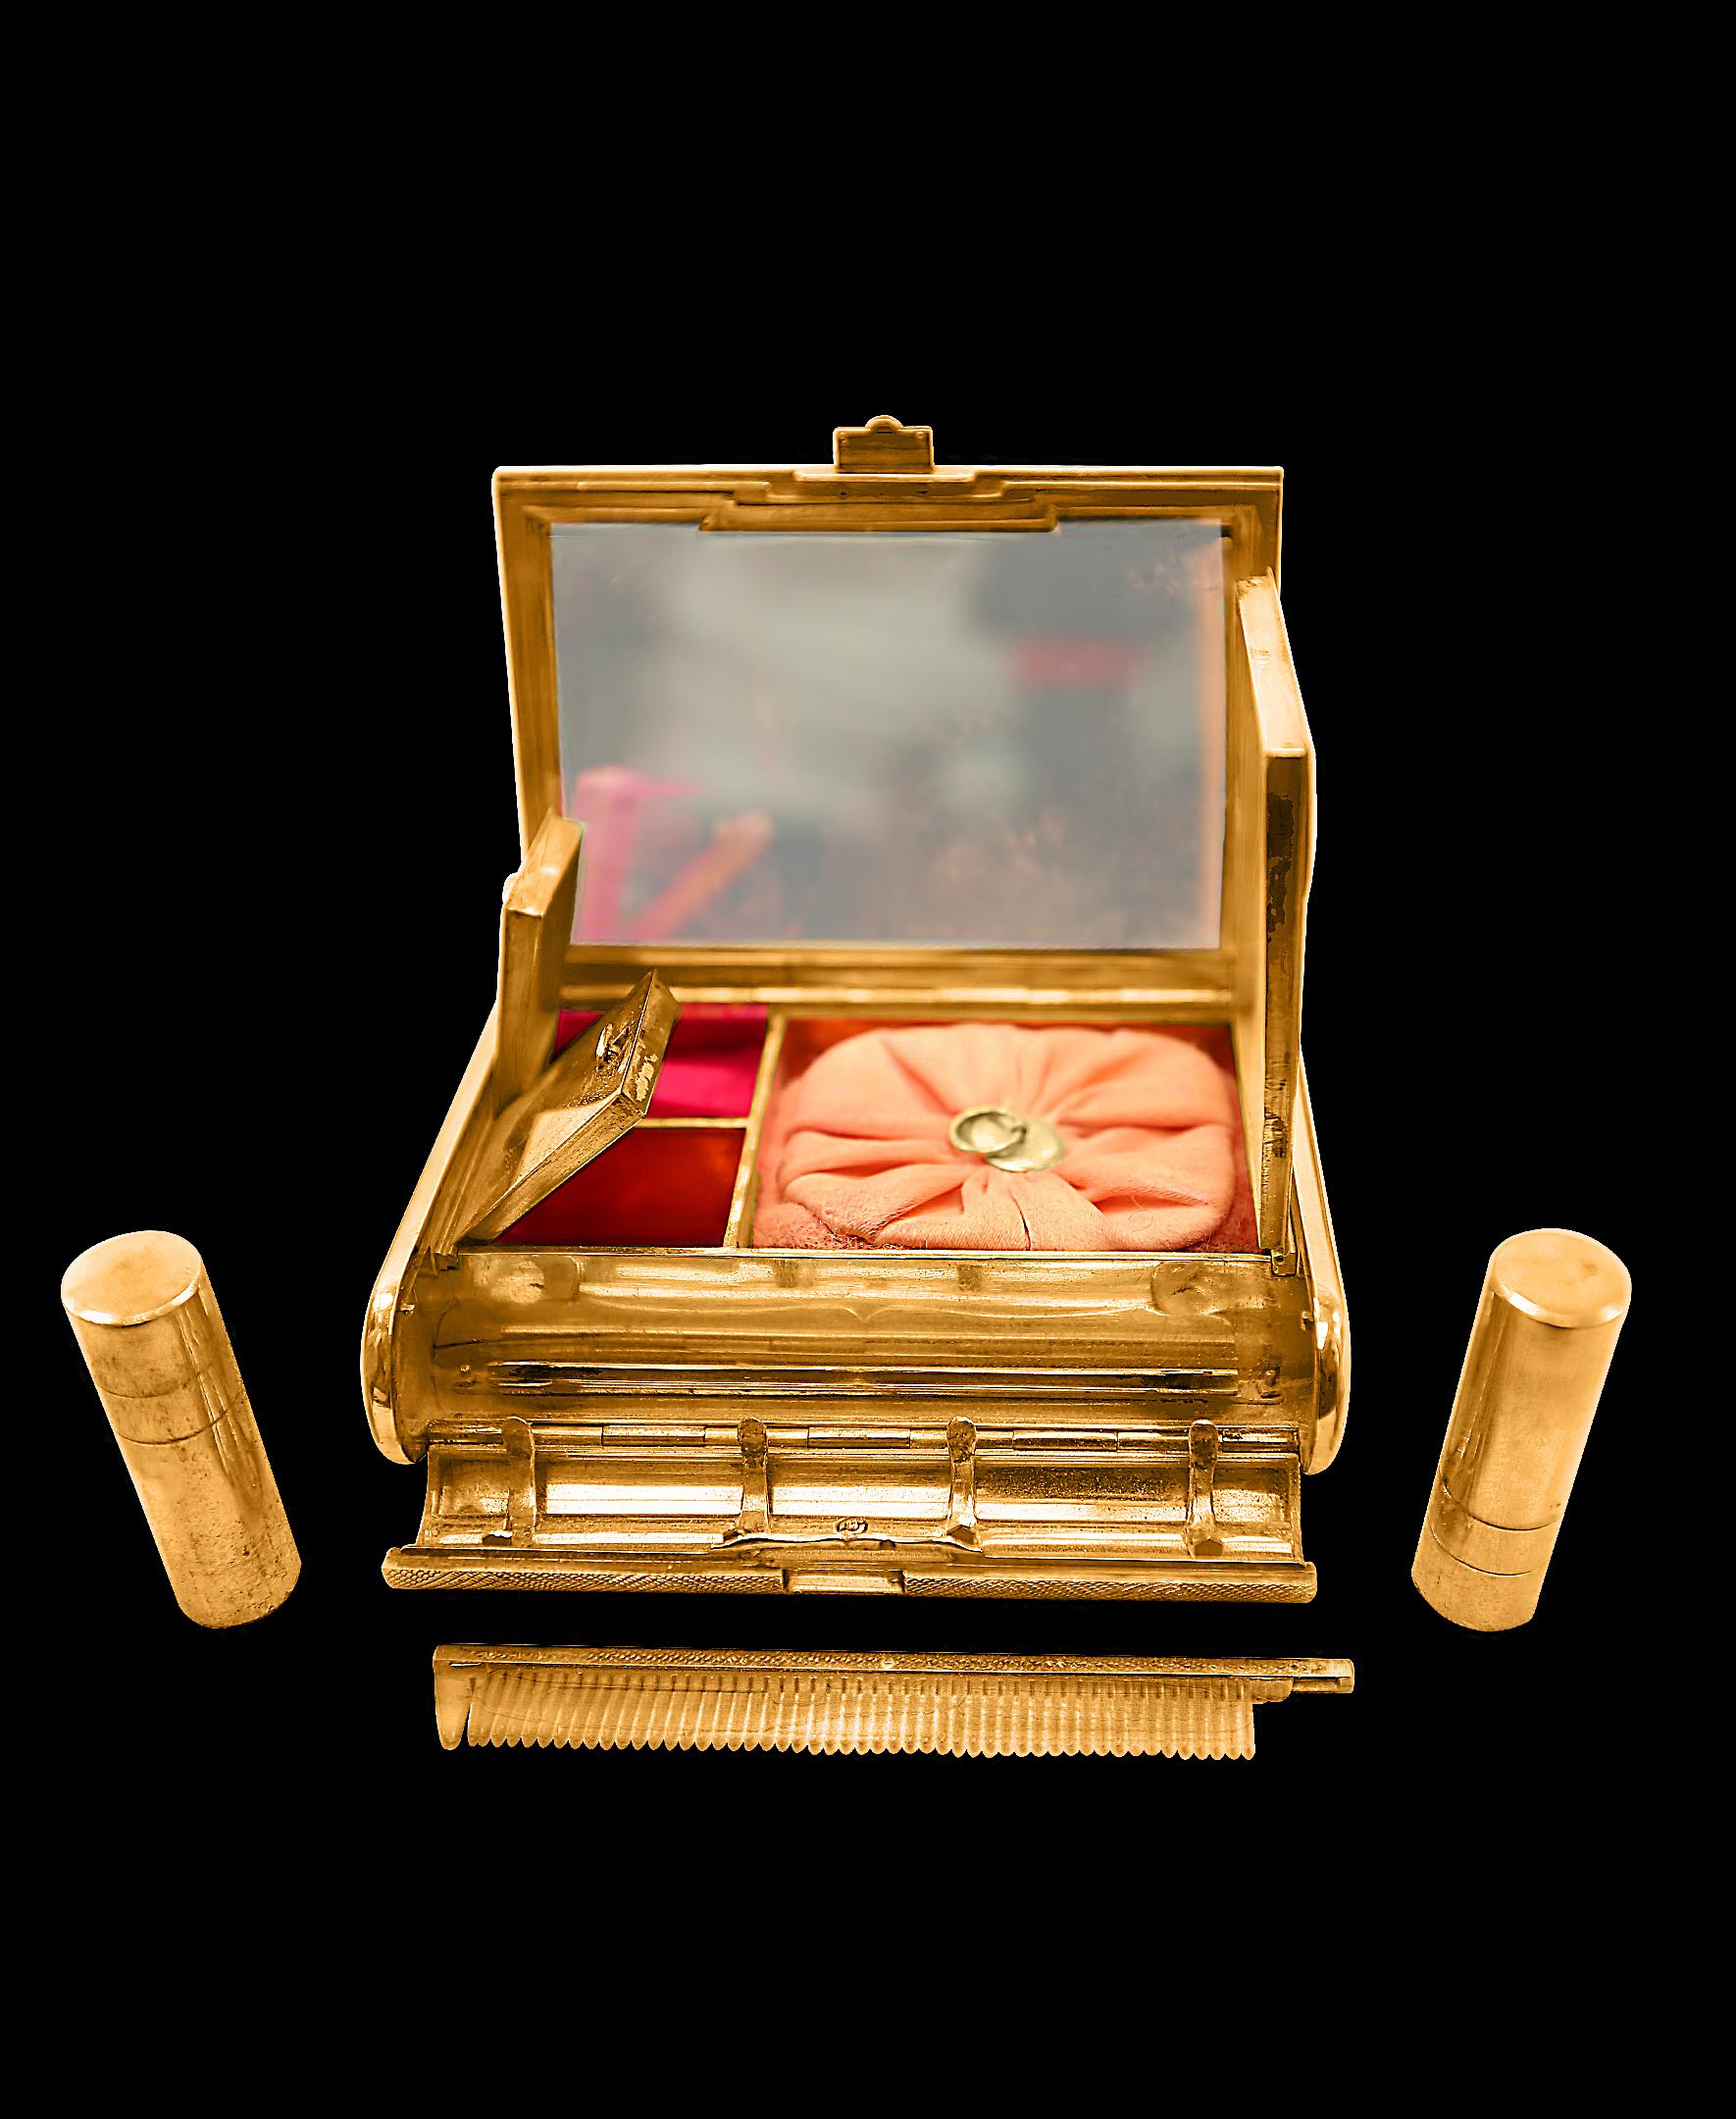 A beautifully crafted Vanity case by Cartier in 18-karat yellow gold from the Art Deco period of the 1930s
Cartier - Art Deco 18-karat yellow gold vanity or compact box with diamonds (0.20 carat total) 
Very unique and rare find .
Box has an